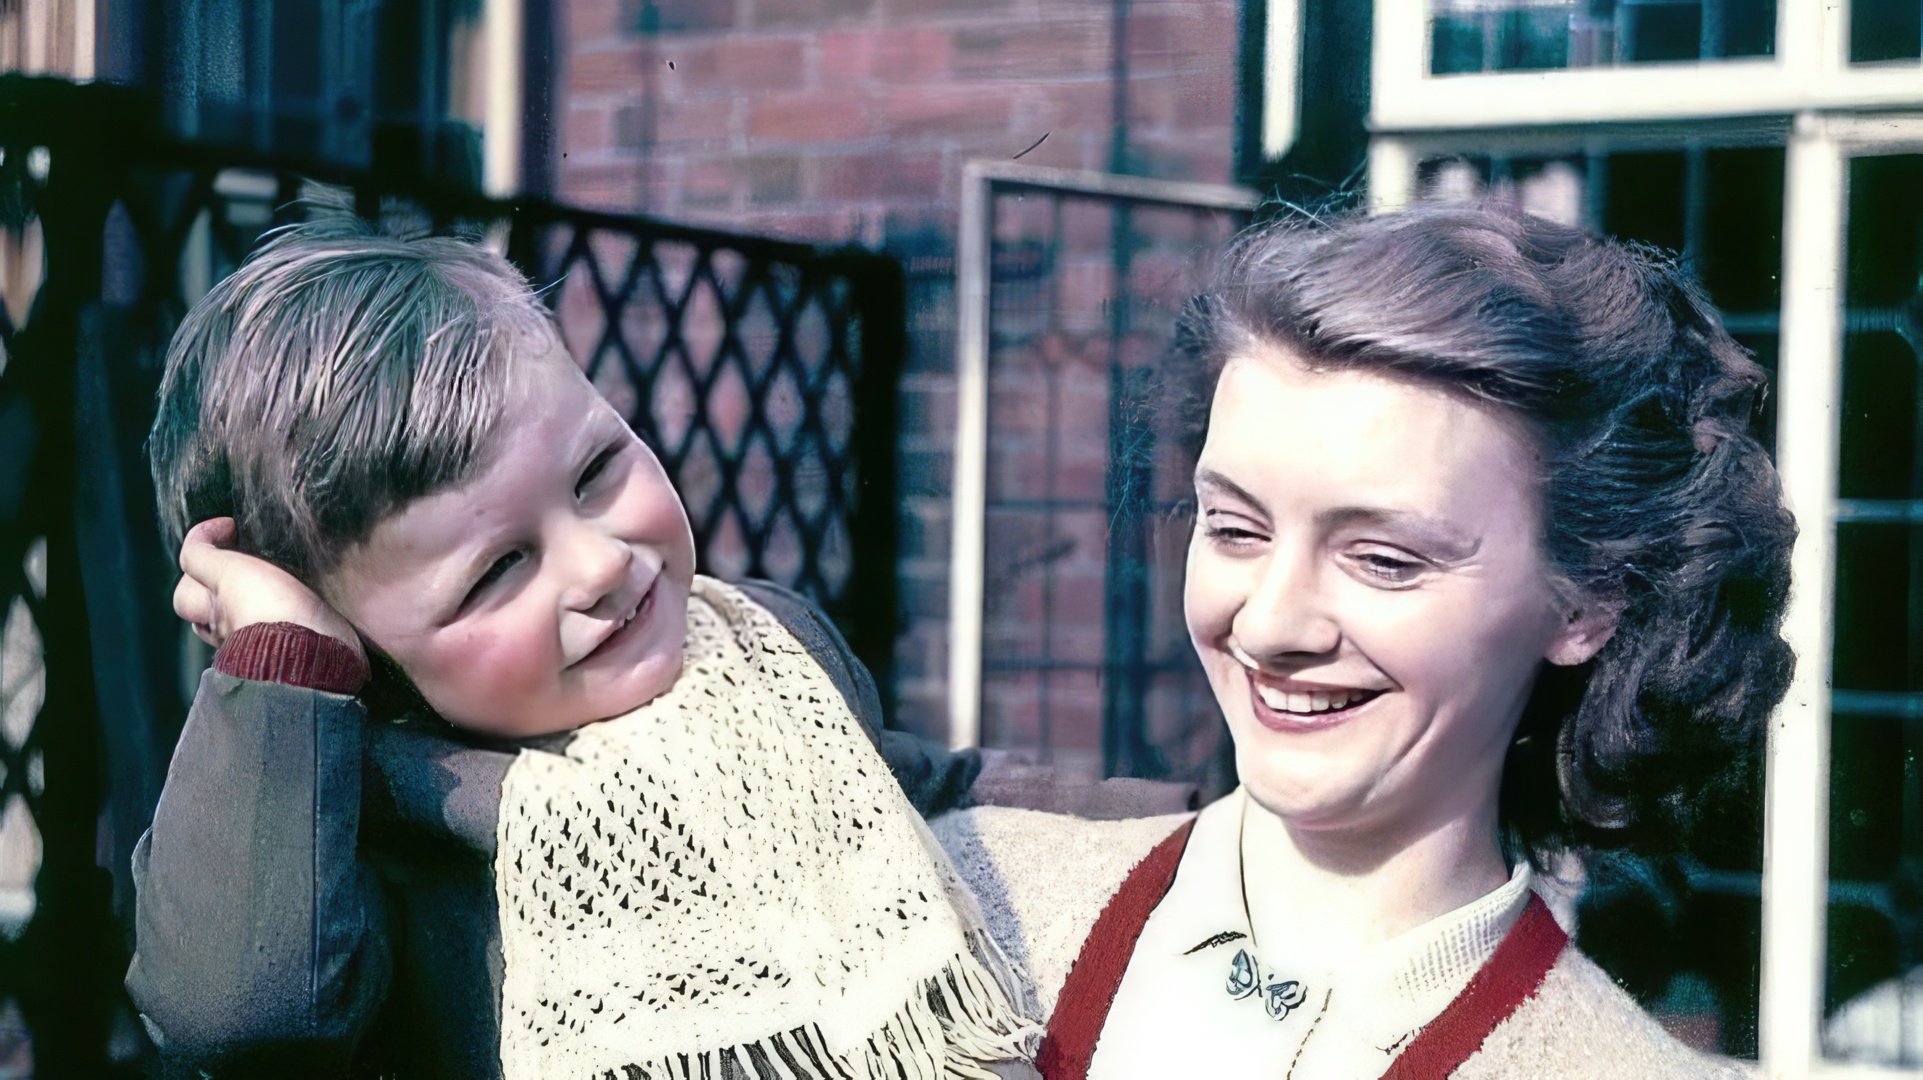 Young Gordon Sumner (in the photo with his aunt)